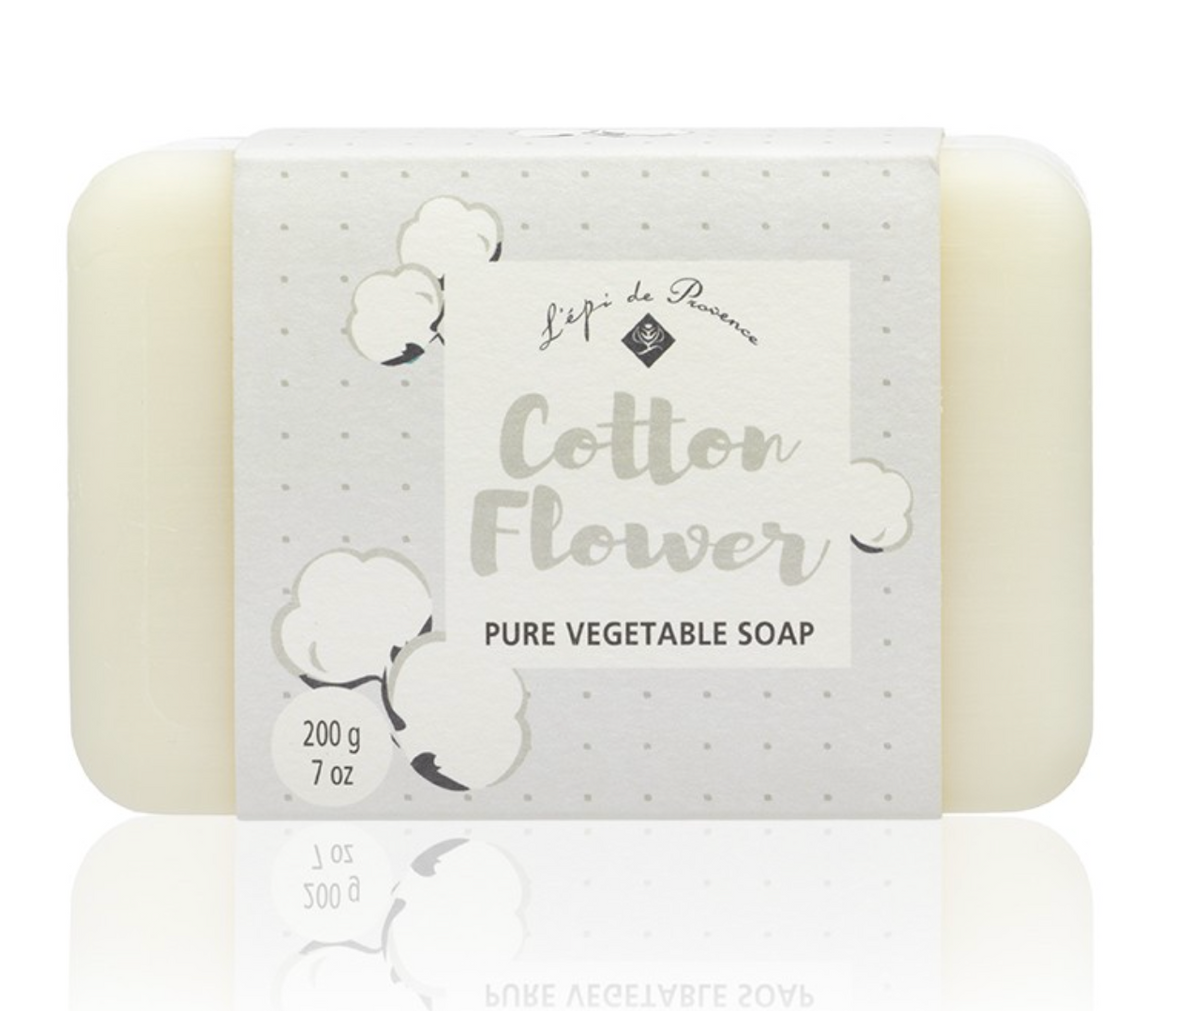 Cotton Flower Soap - Heart of the Home LV